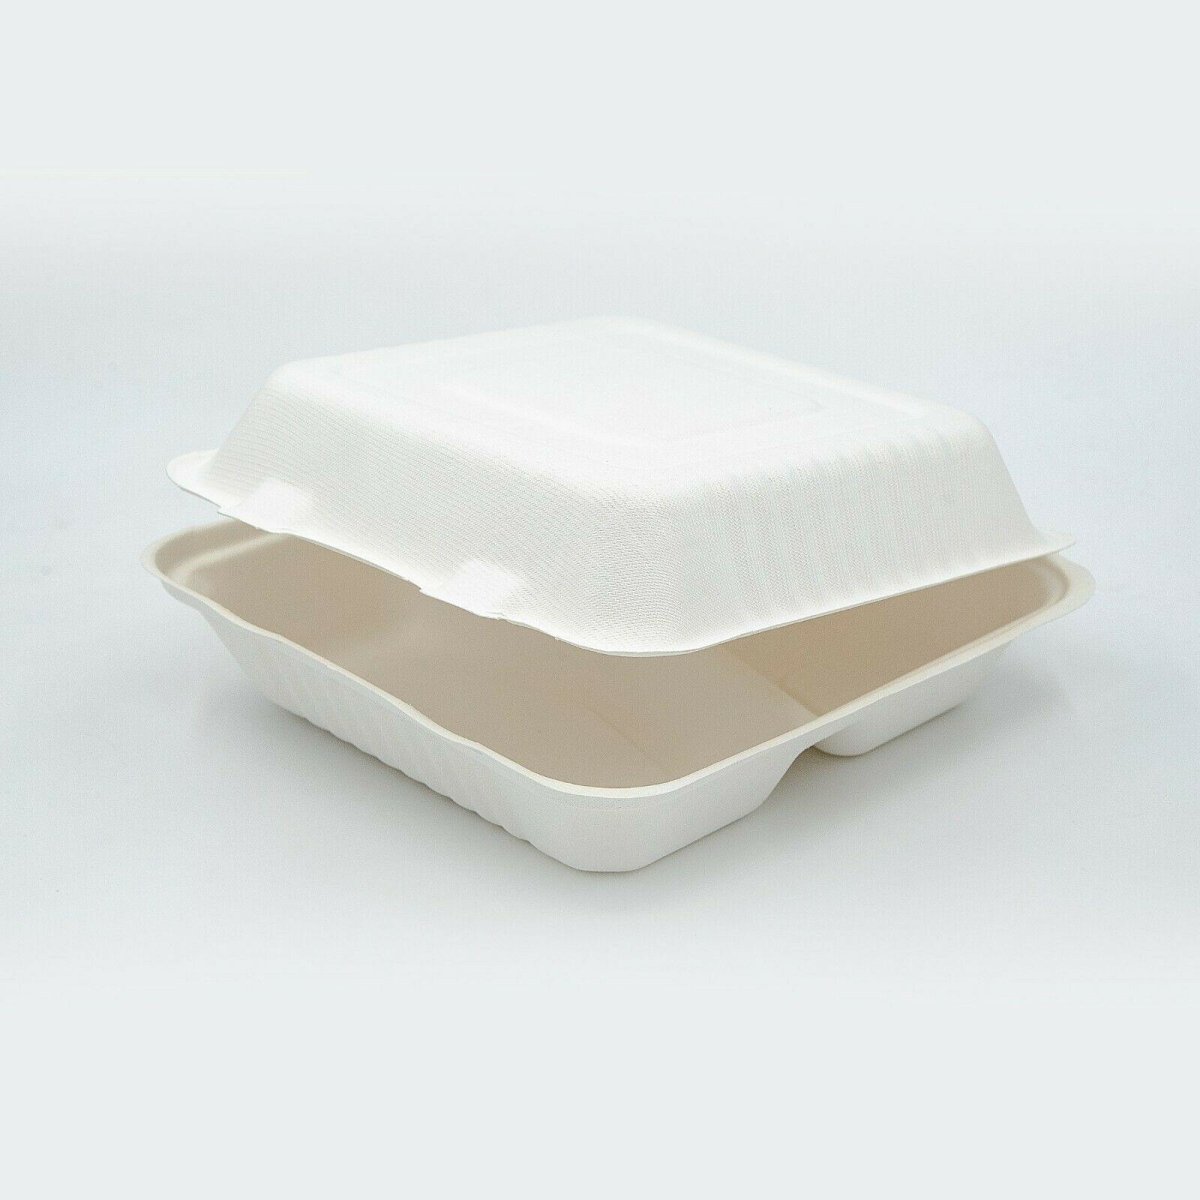 9 x 9 x 3" Sugarcane Clamshell Compostable Takeaway Food Containers